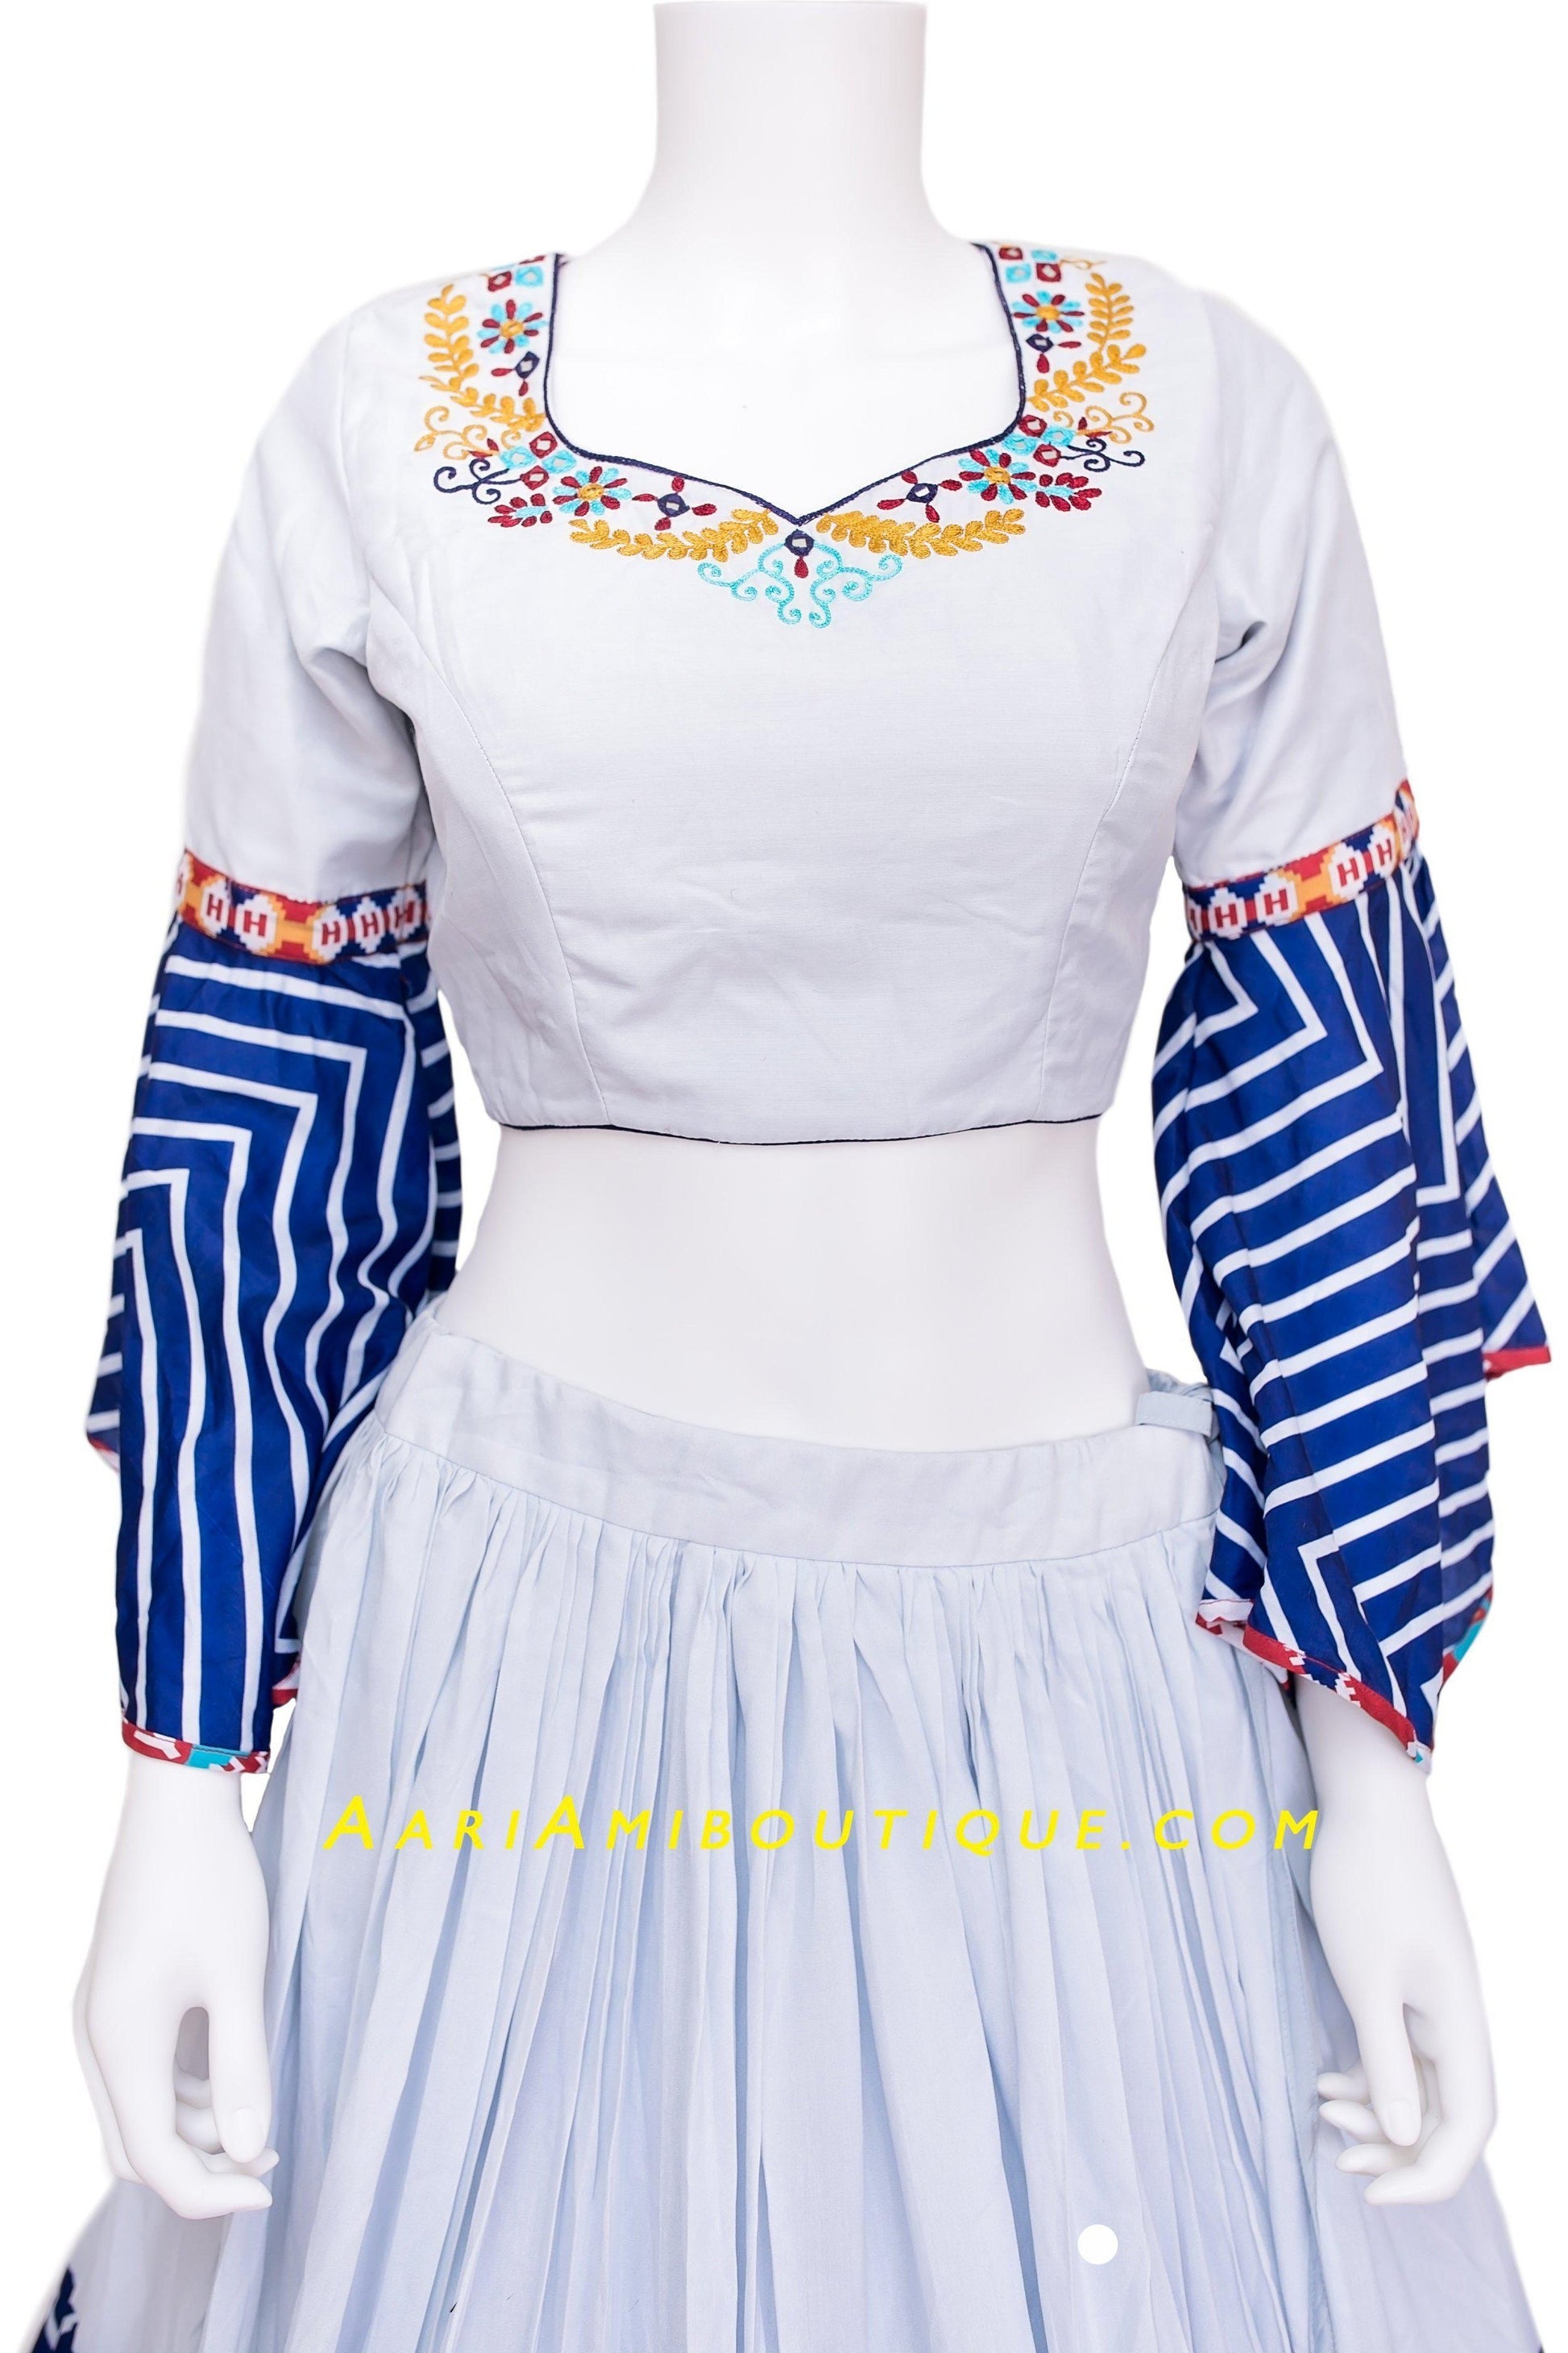 Off-White and Blue Embroidered Chaniya Choli Set-AariAmi Boutique